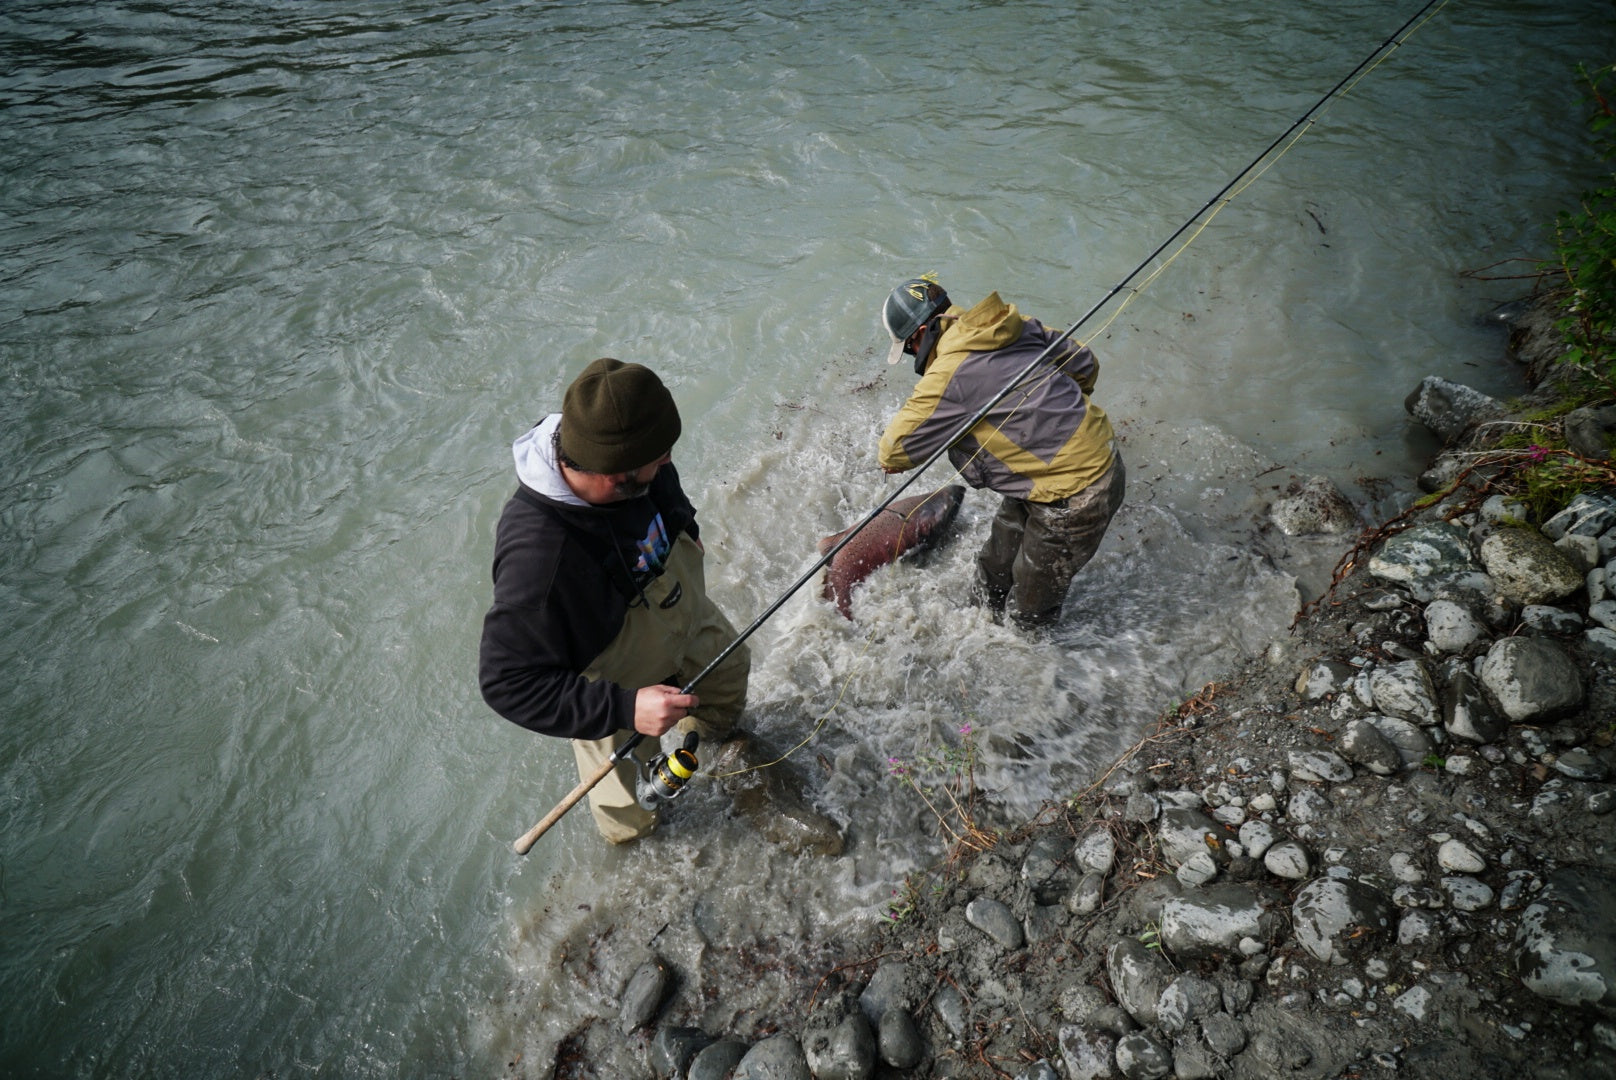 Two individuals are standing in a river. One is watching while the other is pulling in their fish.